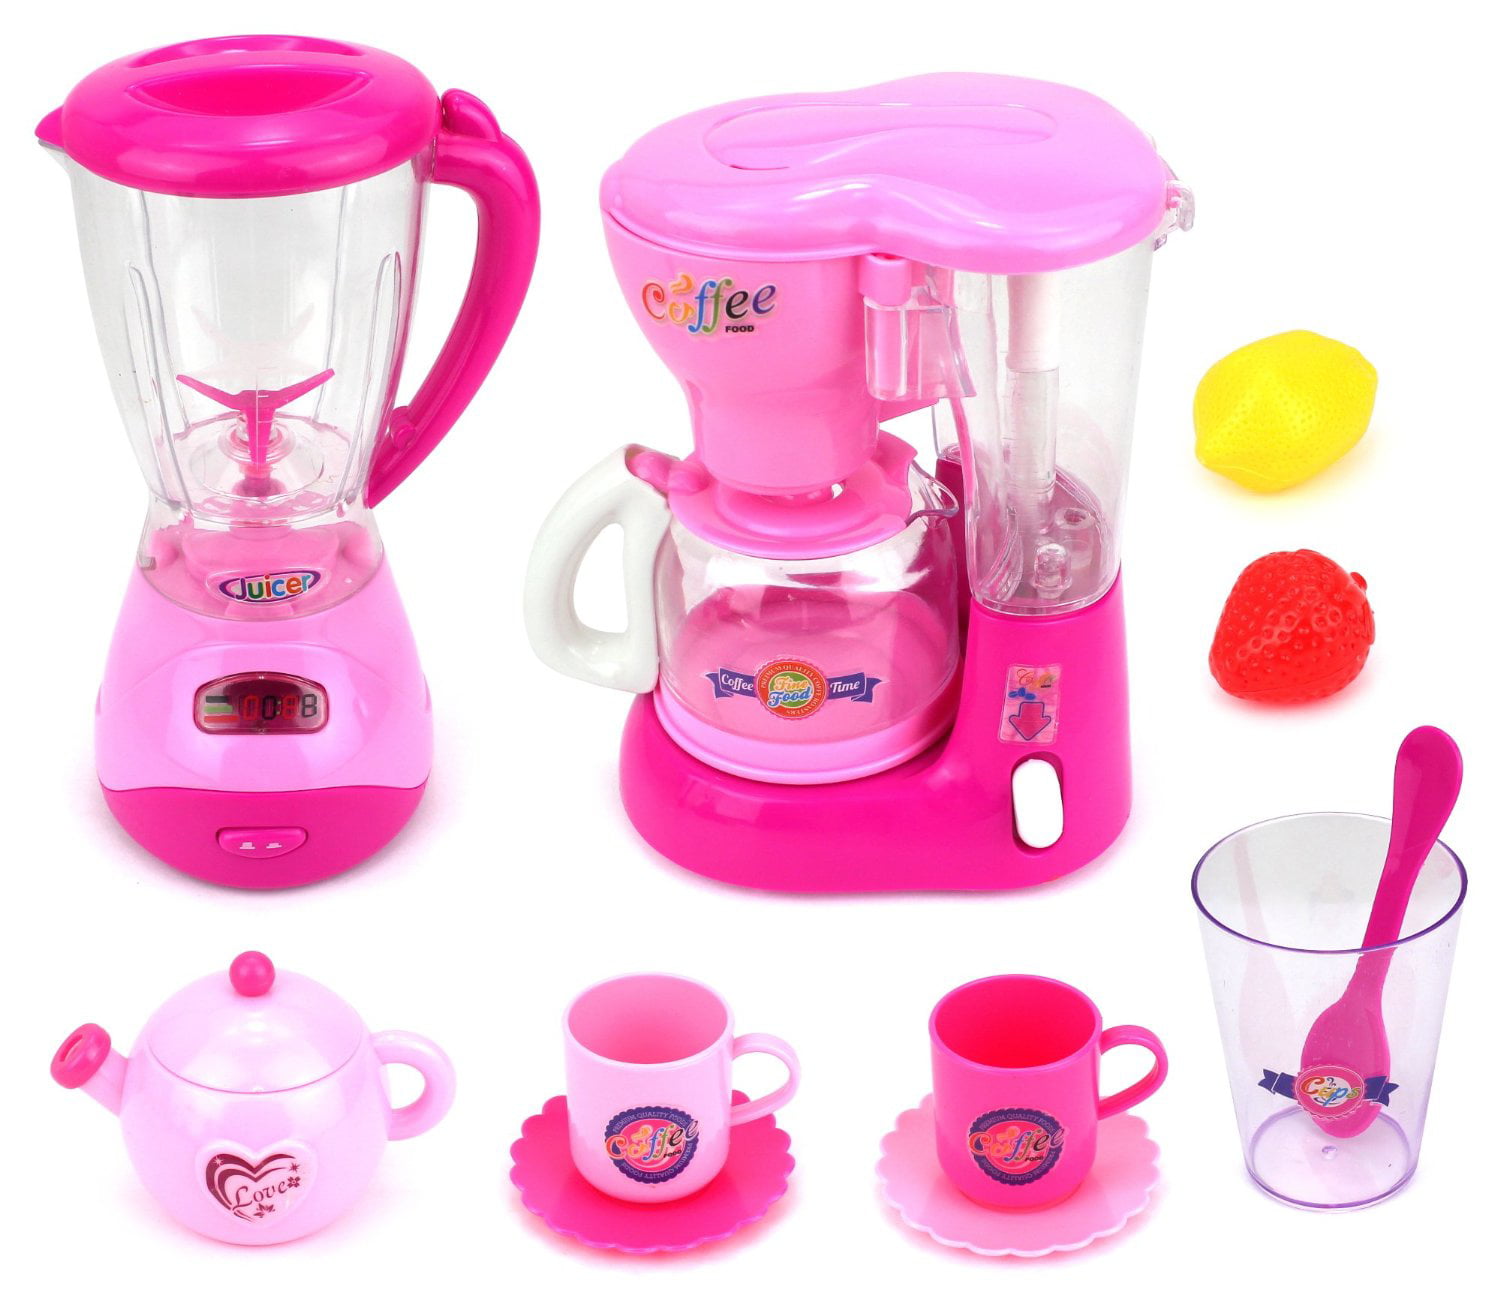 Details about   Kitchen Mini Machine Pretend Play Home Appliance Educational Toy  kids baby gift 